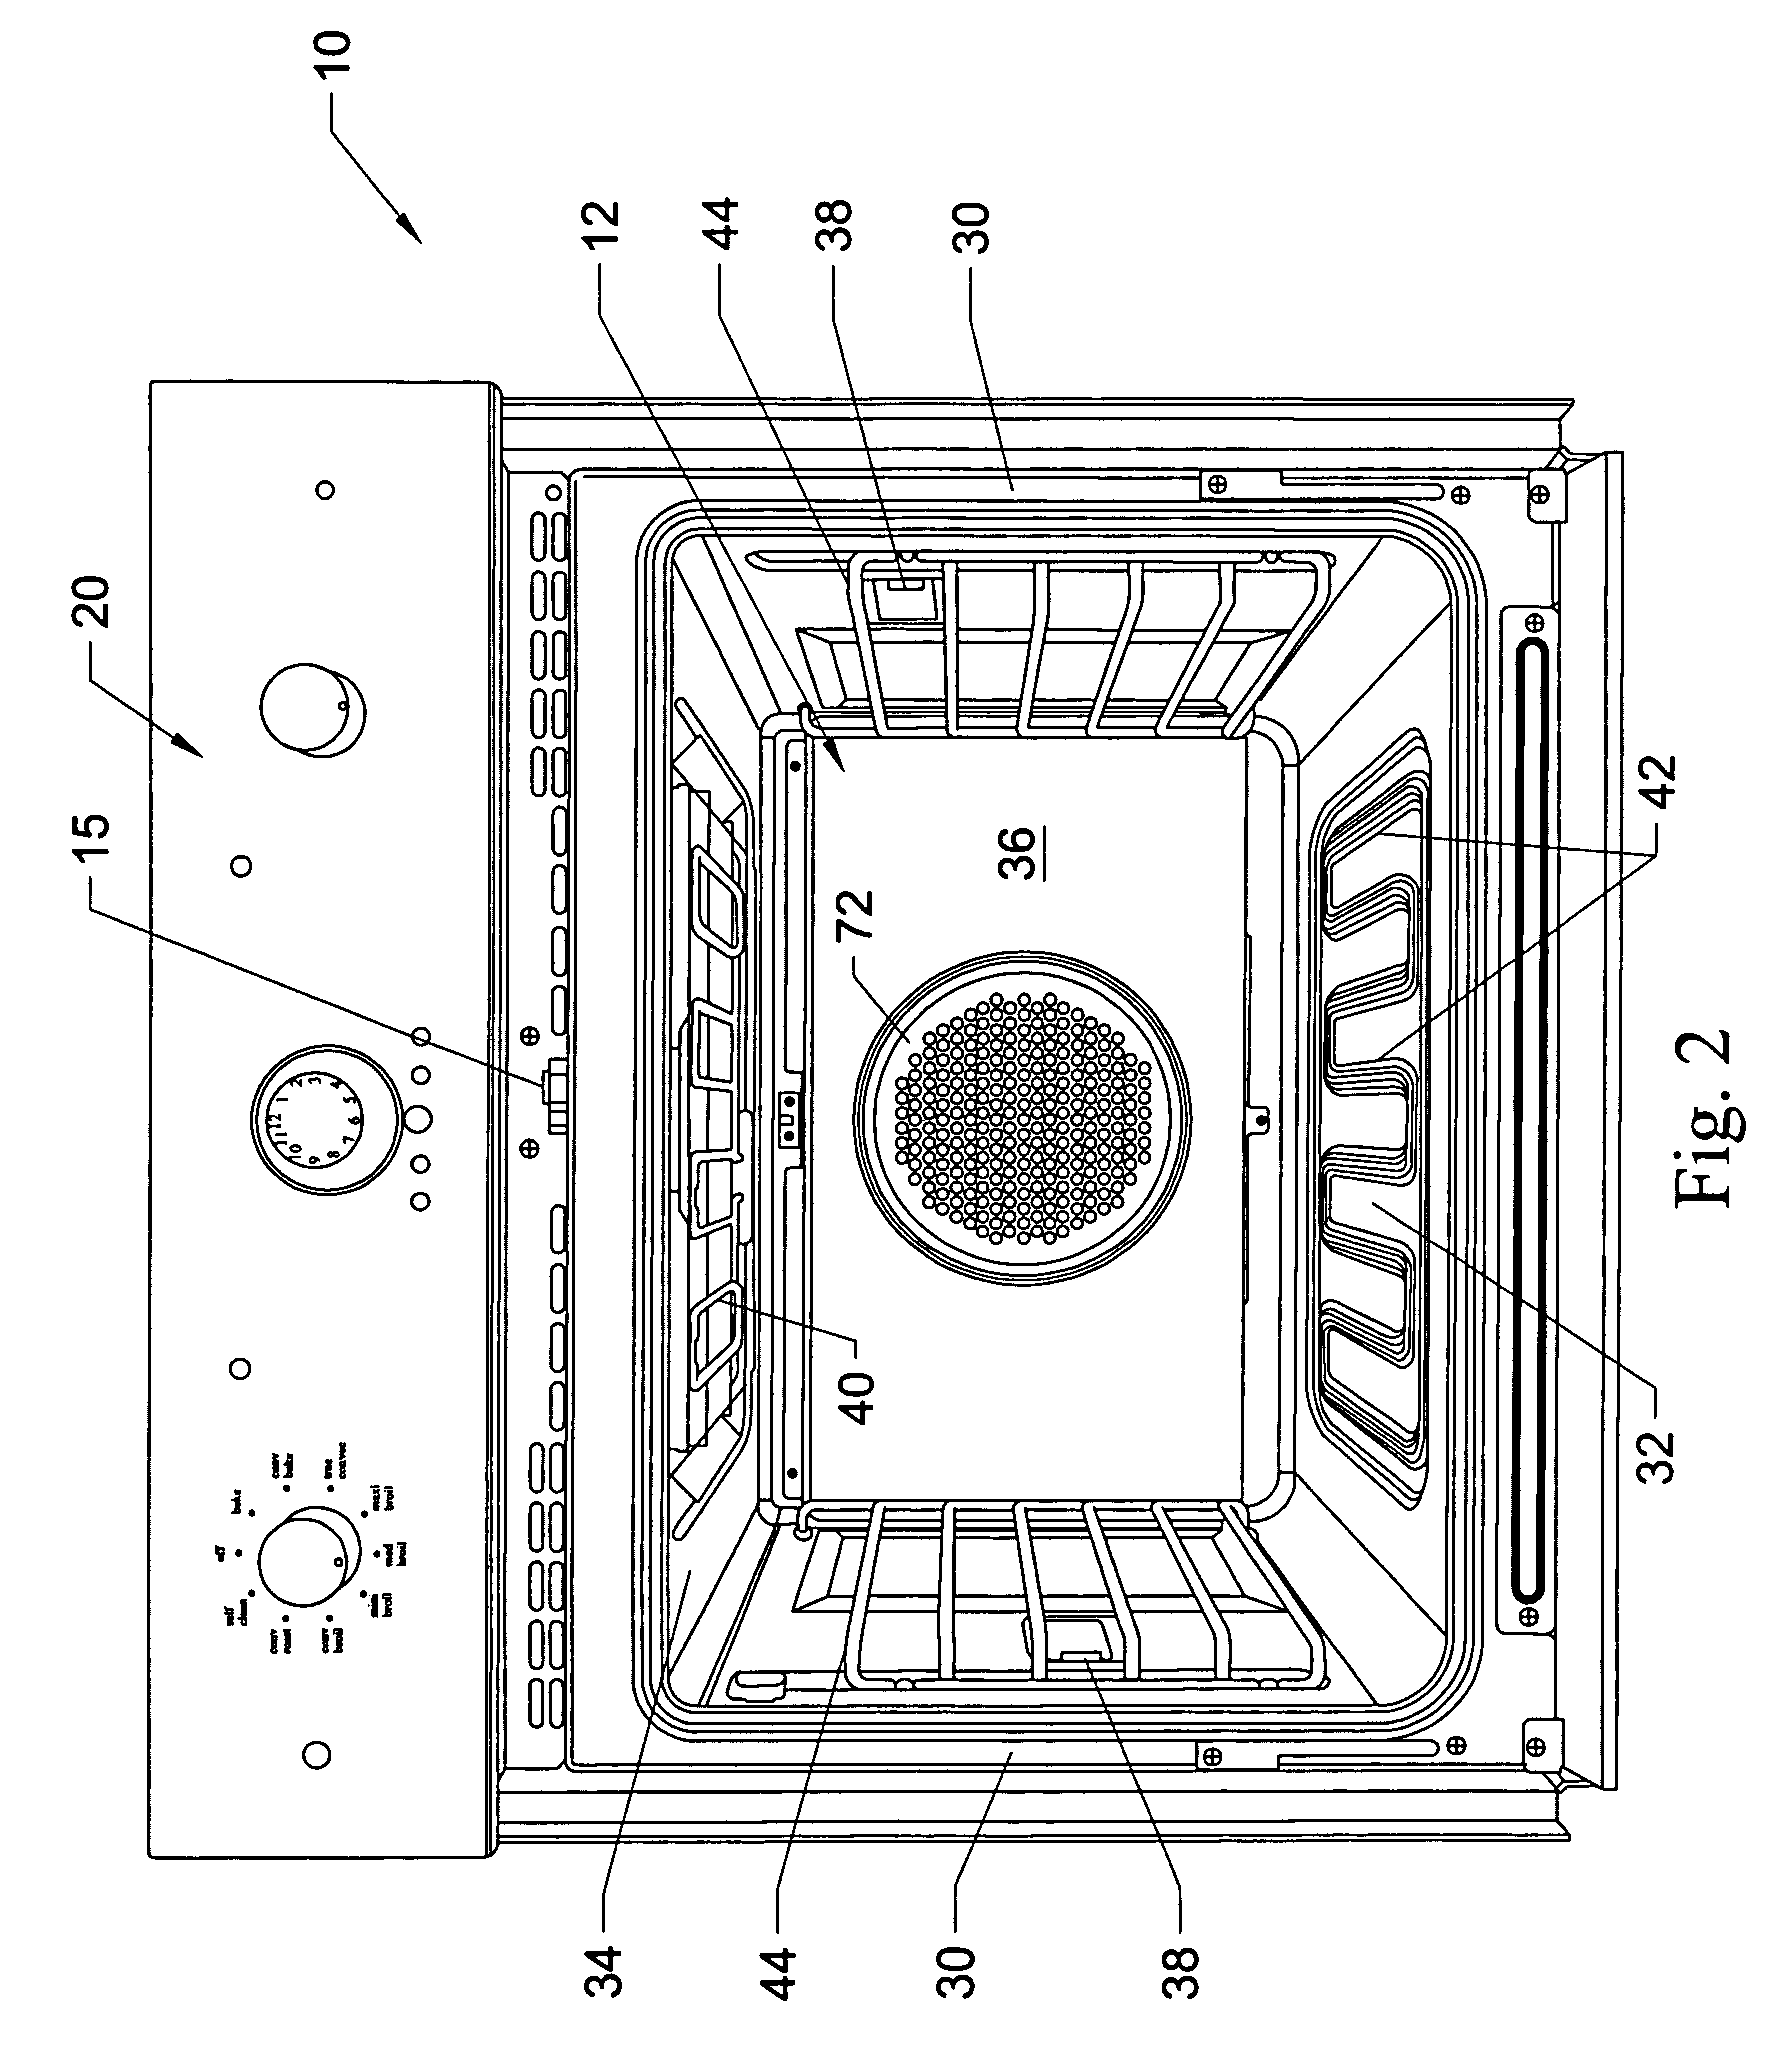 Multi-mode convection oven with flow control baffles